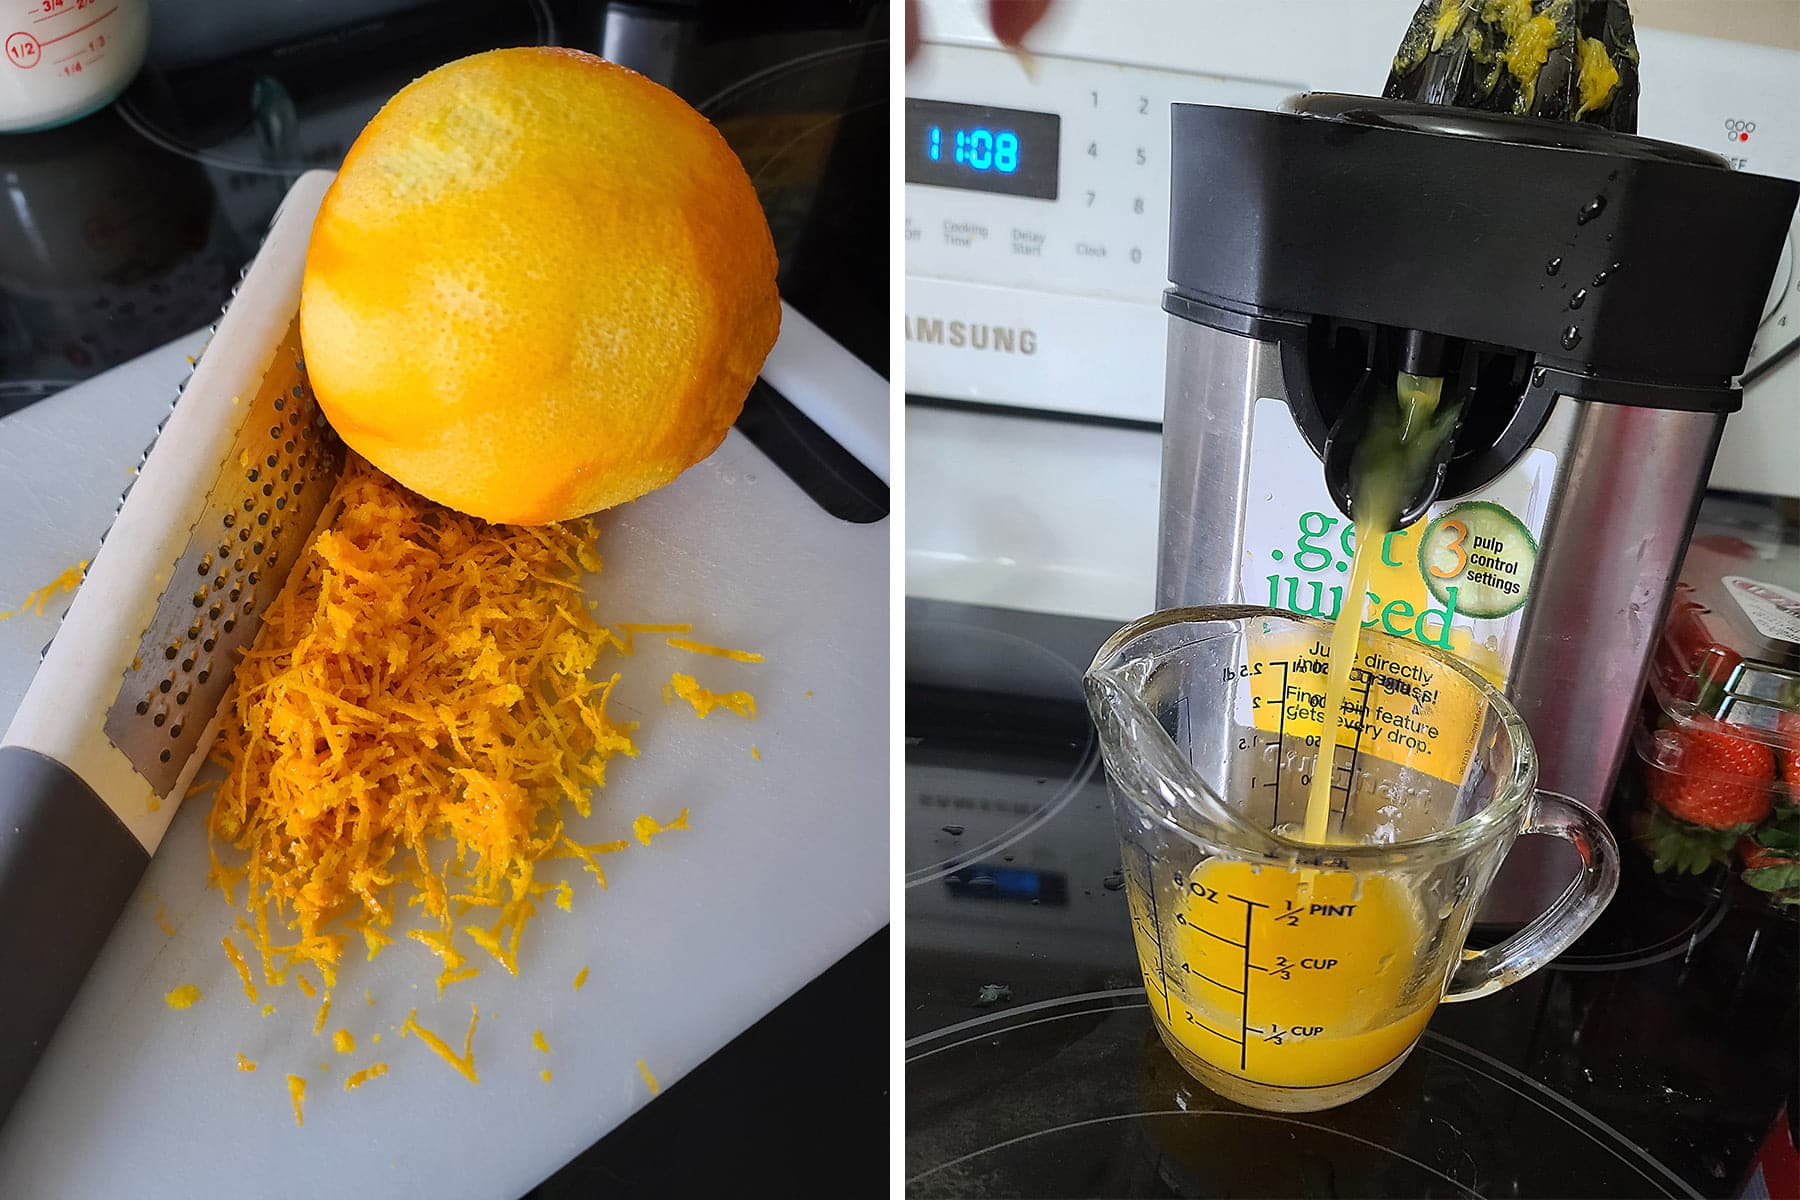 A two part compilation image showing a zested orange on a cutting board, and the oramge being juiced in a juicer.